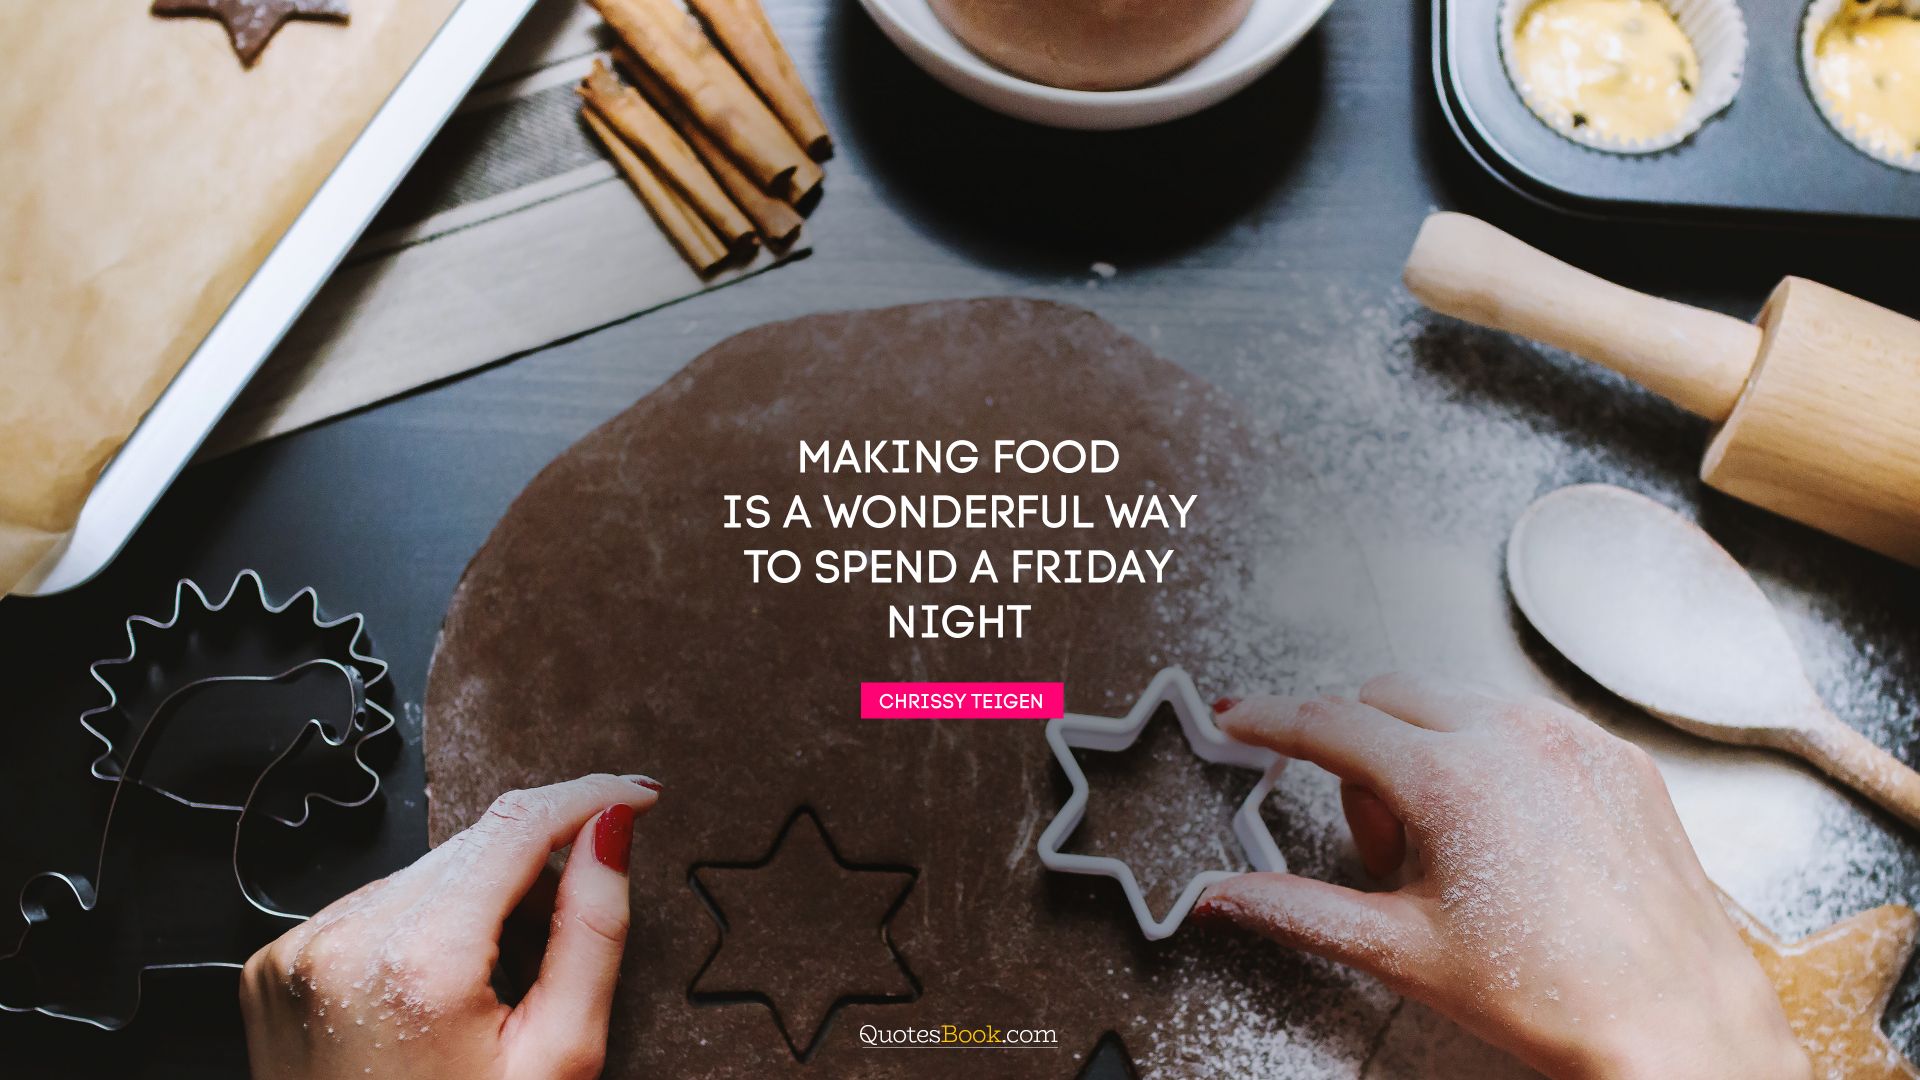 Making food is a wonderful way to spend a Friday night. - Quote by Chrissy Teigen